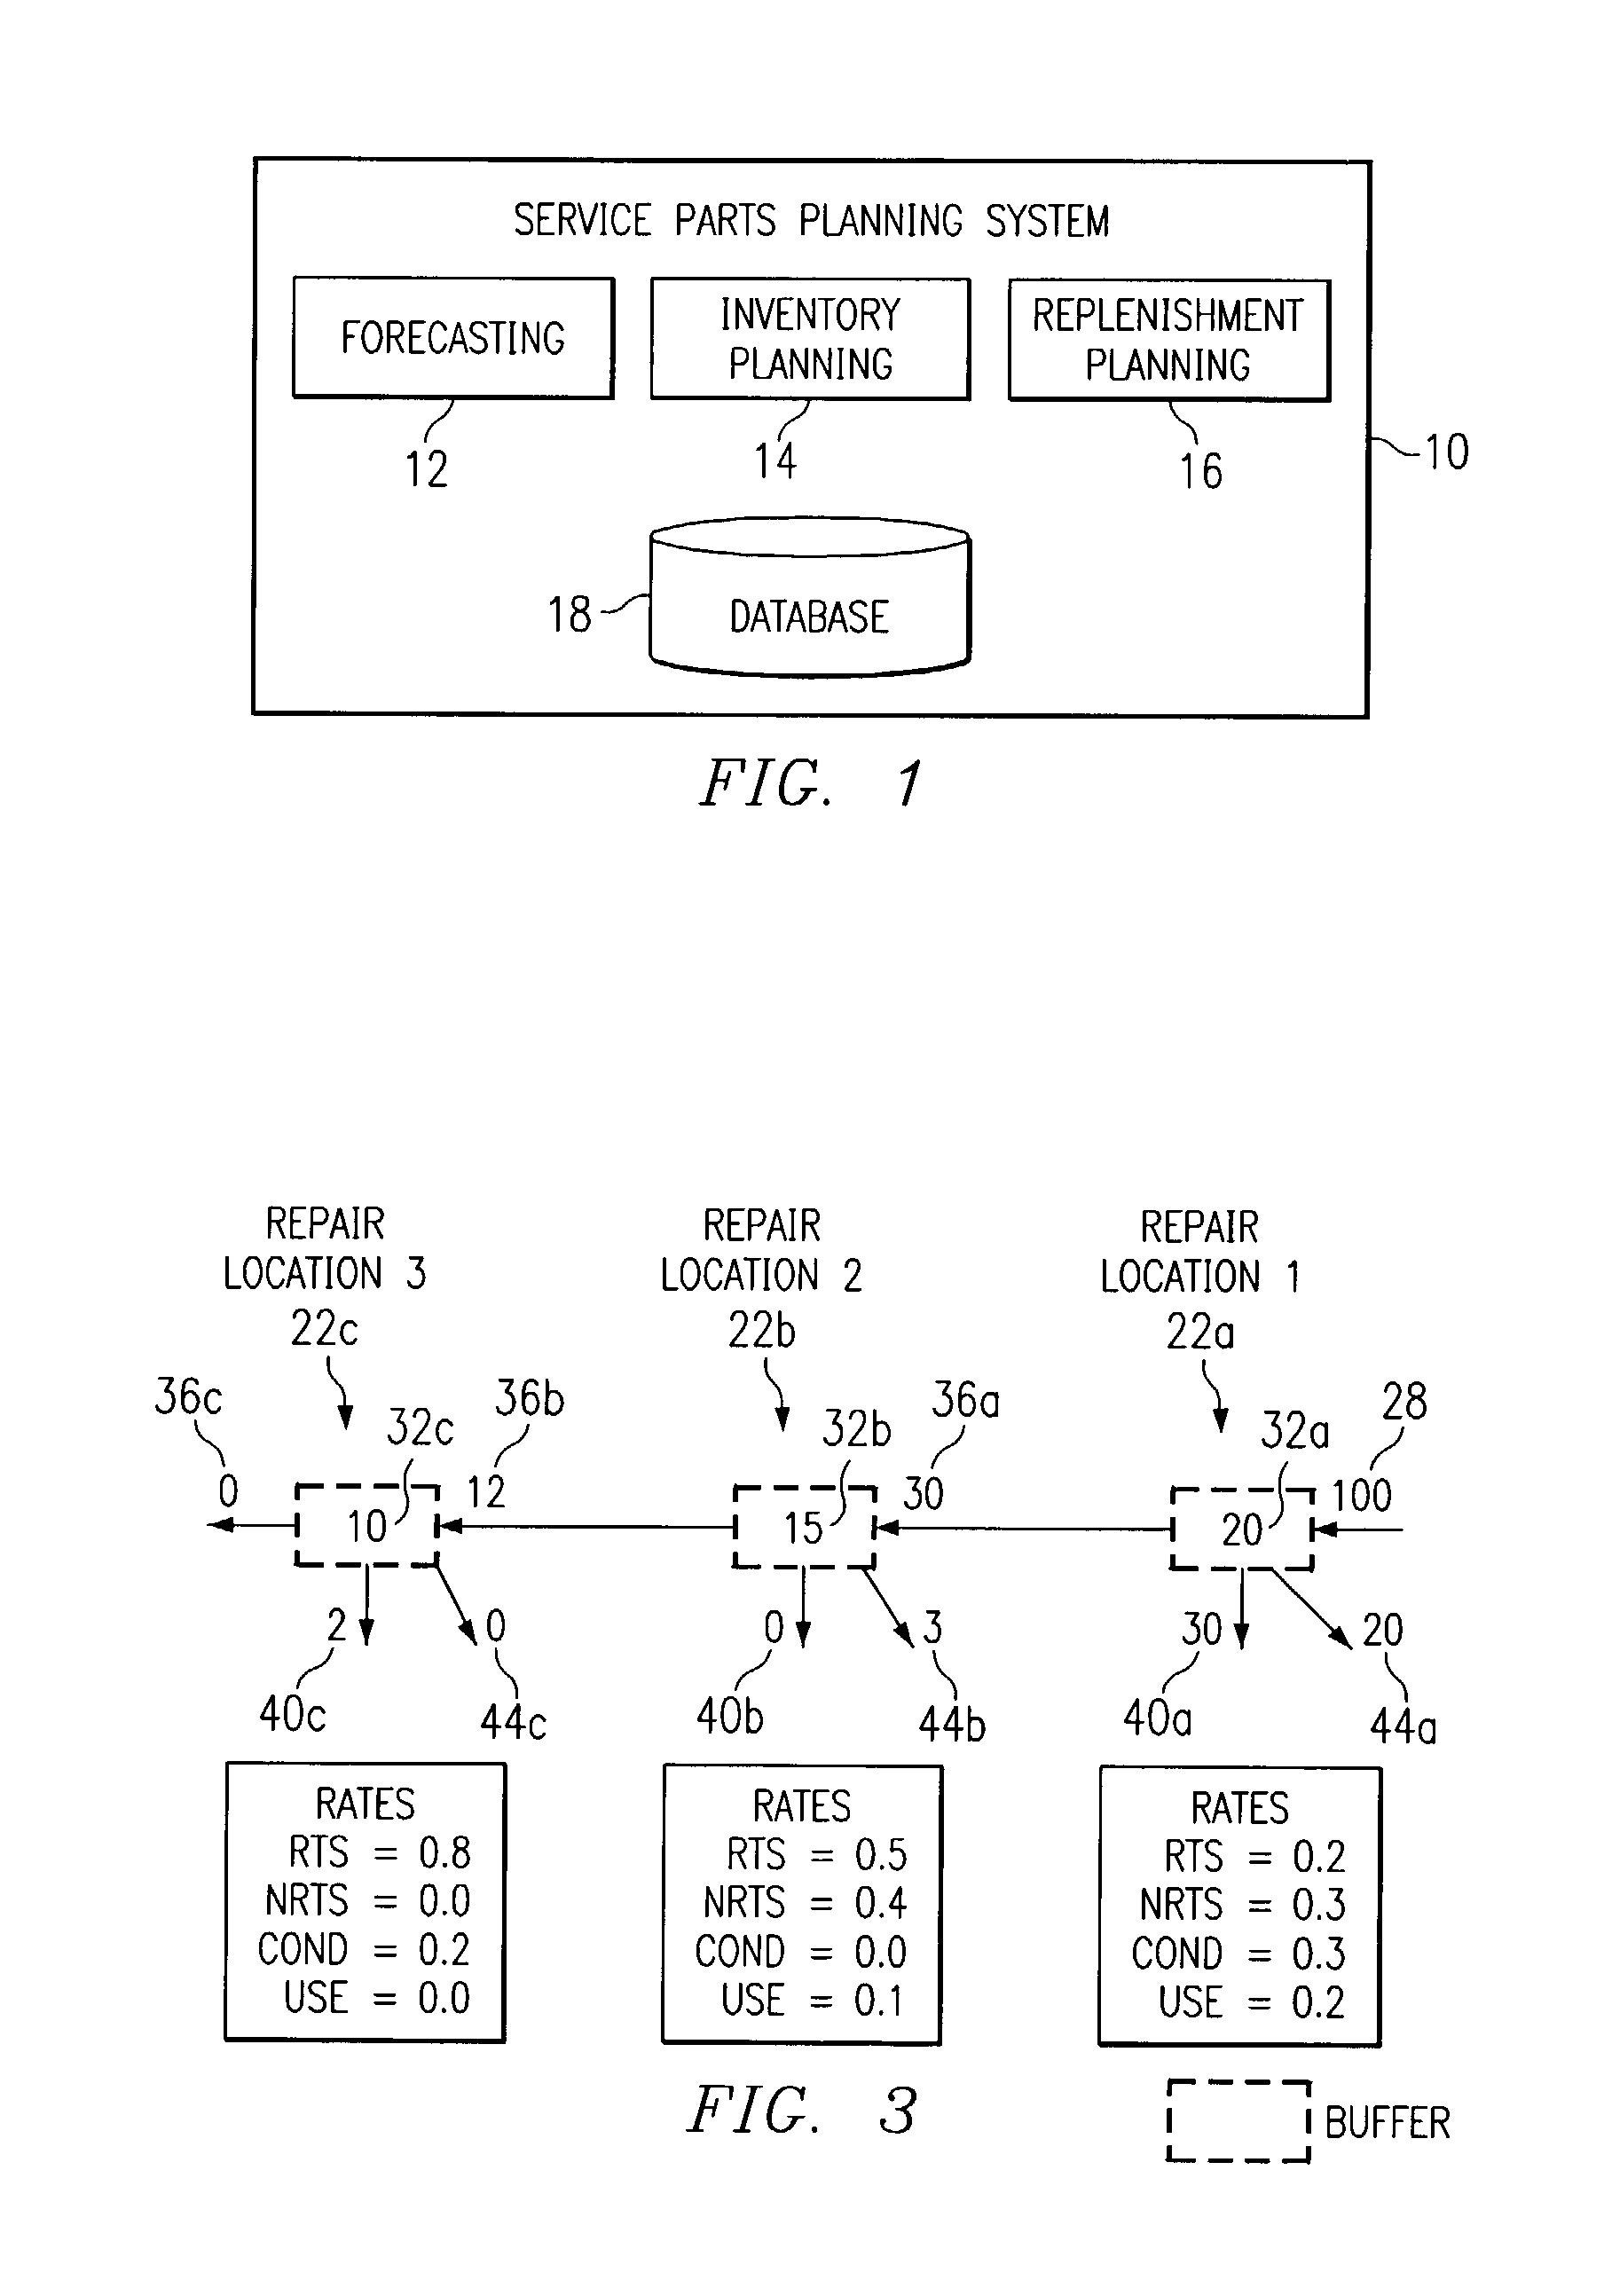 Pull planning for serviceable parts to facilitate on-demand repair planning